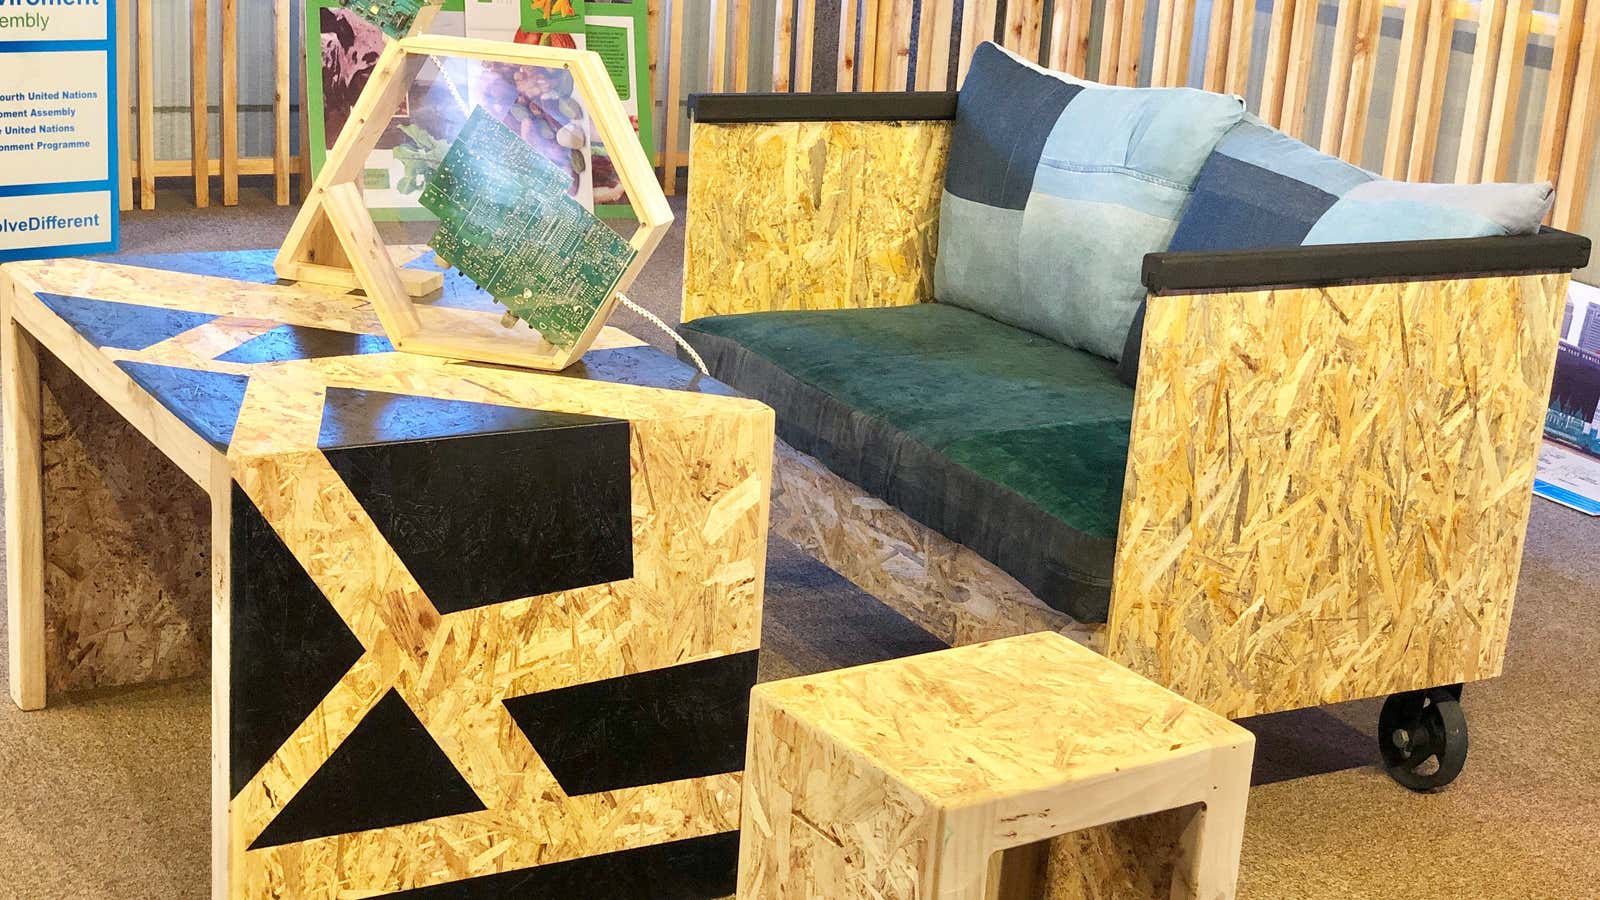 How betting on waste is boosting this Kenyan company’s kids furniture business